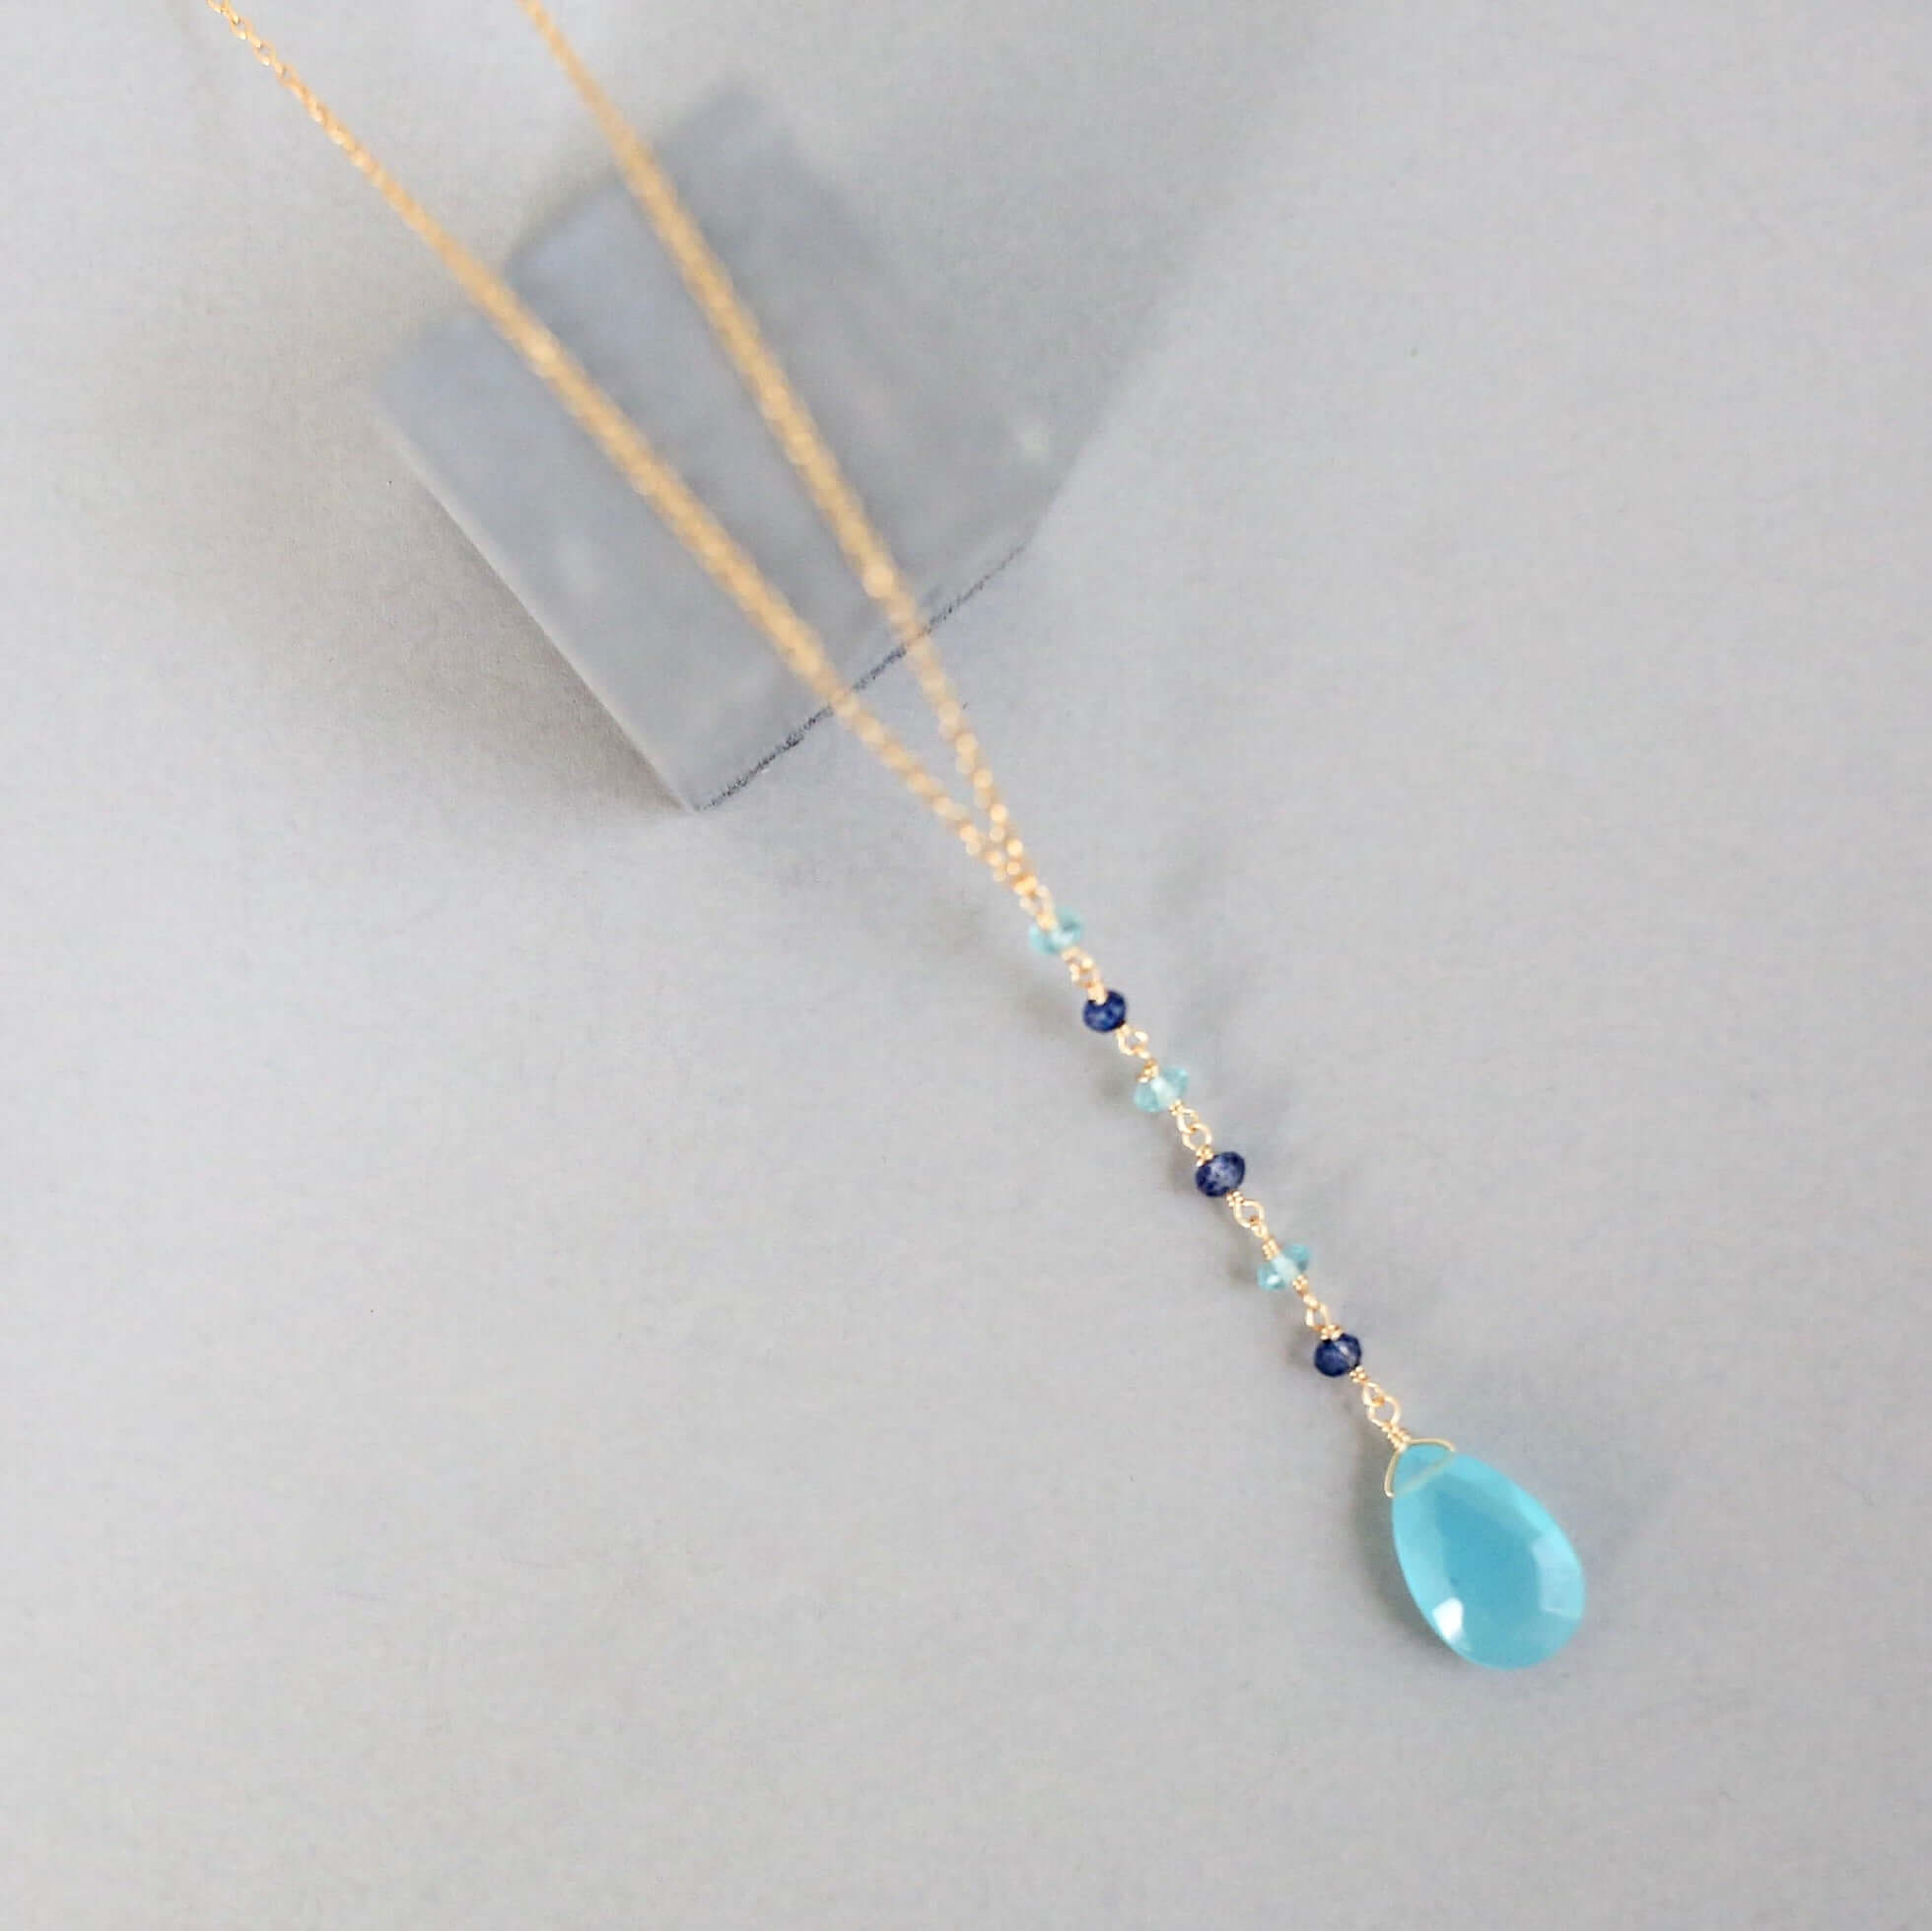 14k Gold Plated Yoga Pendant with Blue Chalcedony Gemstone